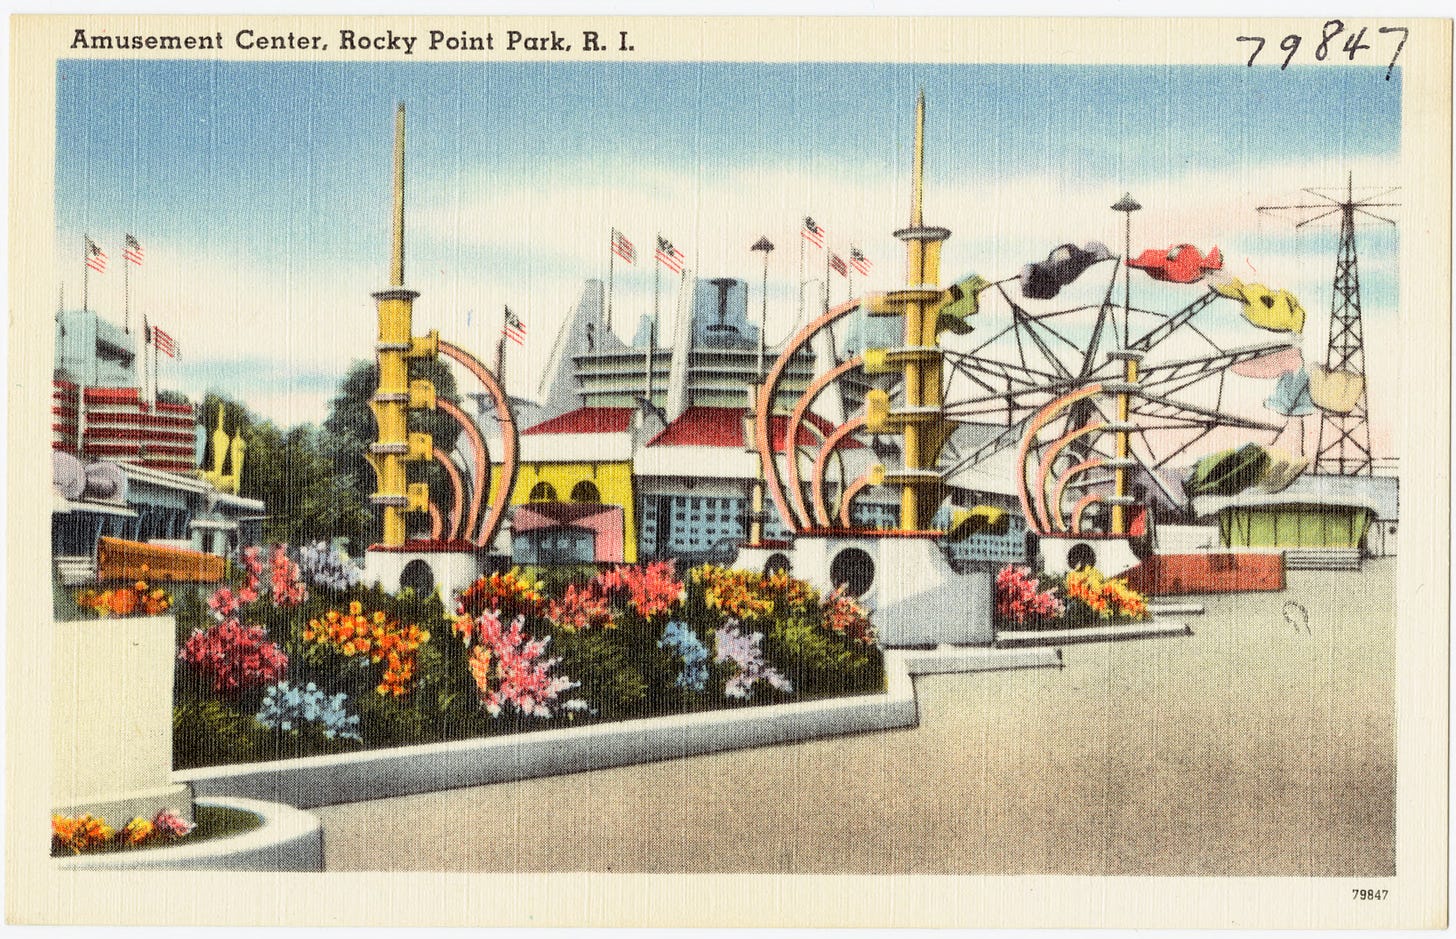 Colorful 1940s postcard of Ferris wheel and other rides at Rocky Point